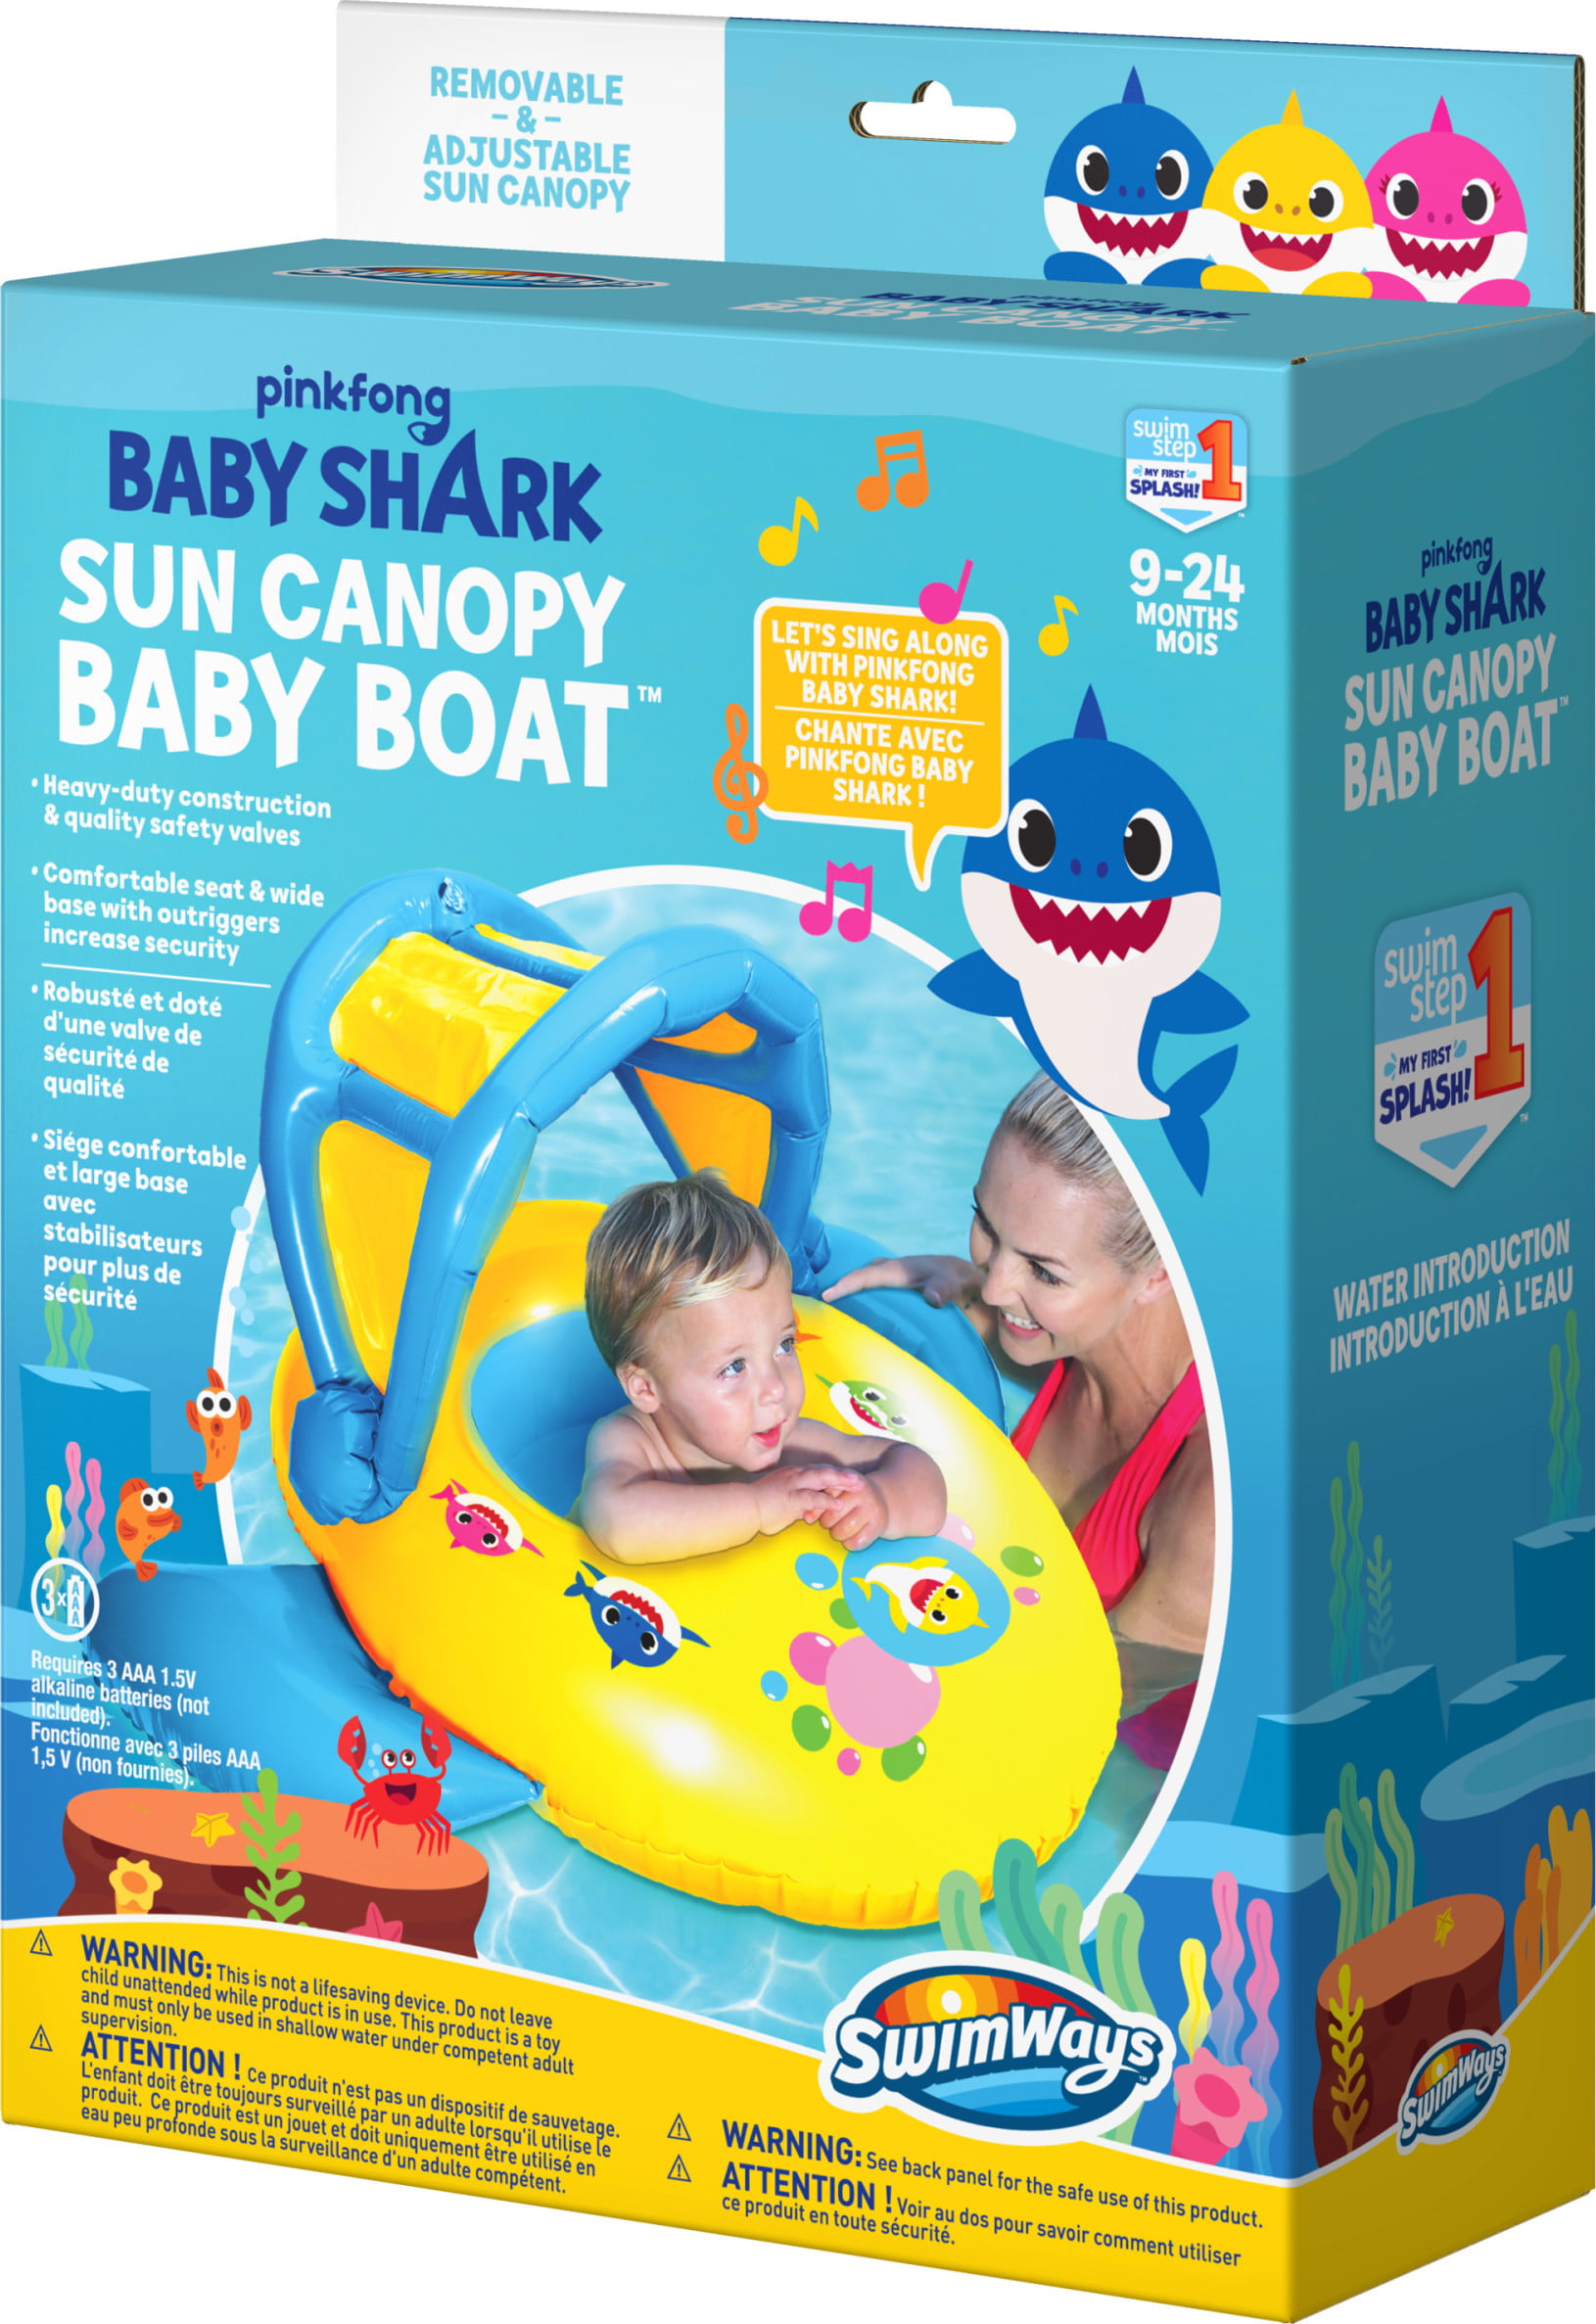 SwimWays Pinkfong Bay Shark Sun Canopy Baby Boat Pool Float 6056713 for sale online 